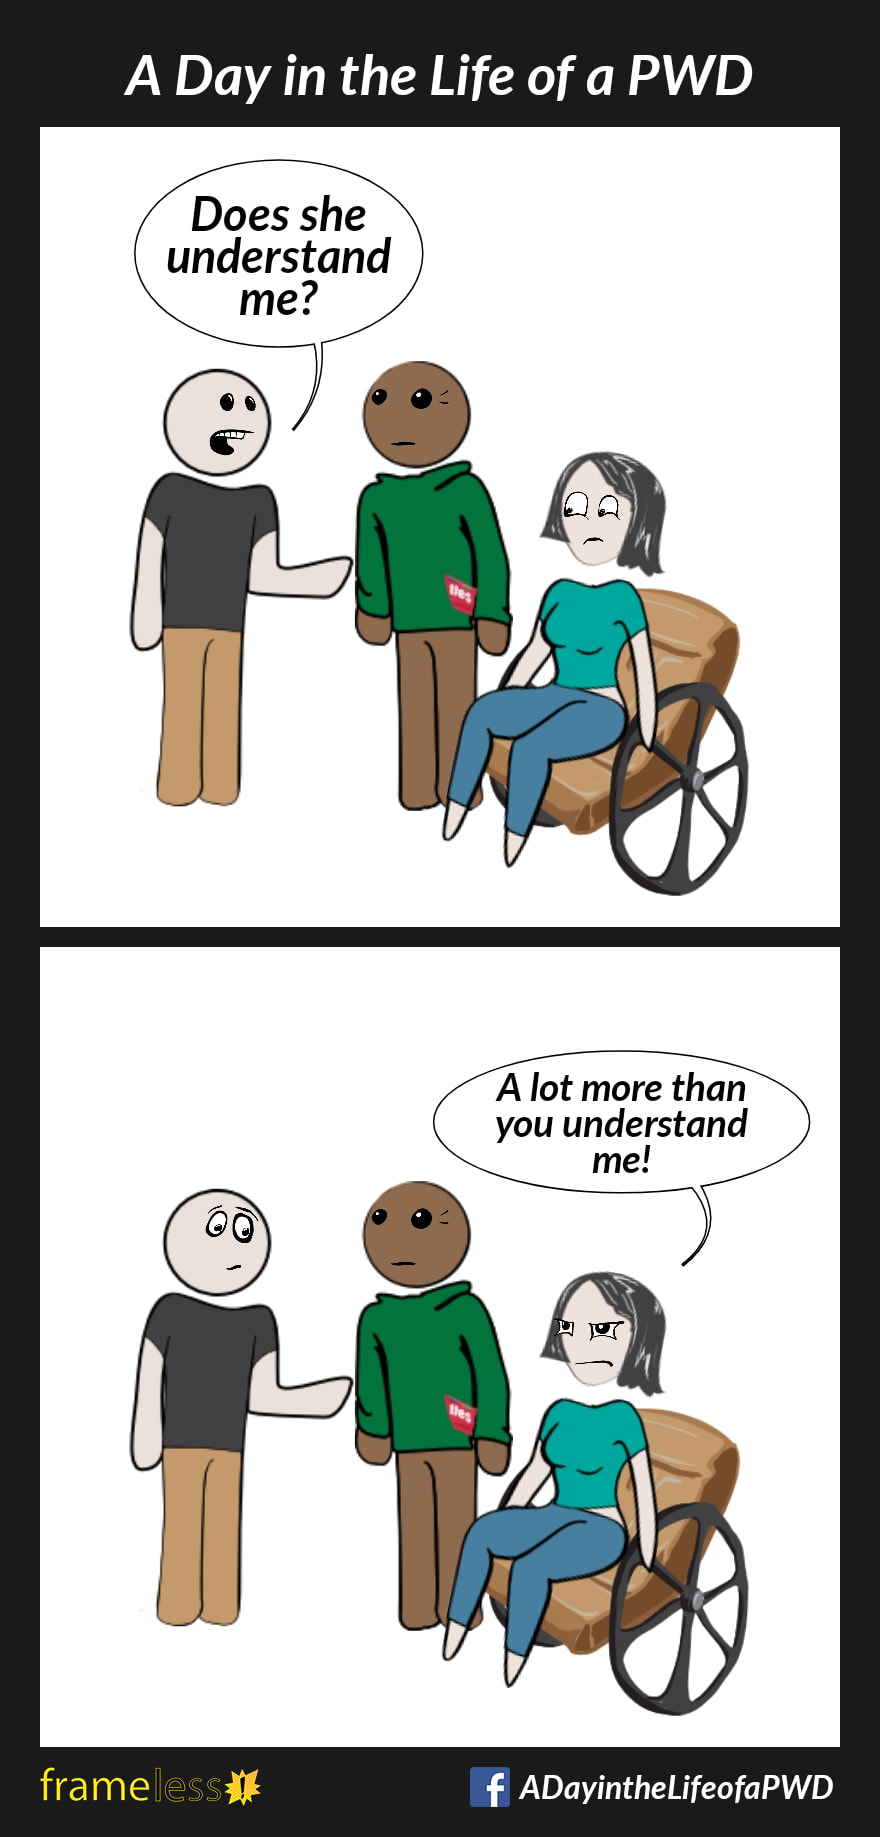 COMIC STRIP 
A Day in the Life of a PWD (Person With a Disability) 

Frame 1:
A woman in a wheelchair is with her husband, talking to a man.
MAN (to husband): Does she understand me?
WOMAN (irritated): At lot more than you understand me!